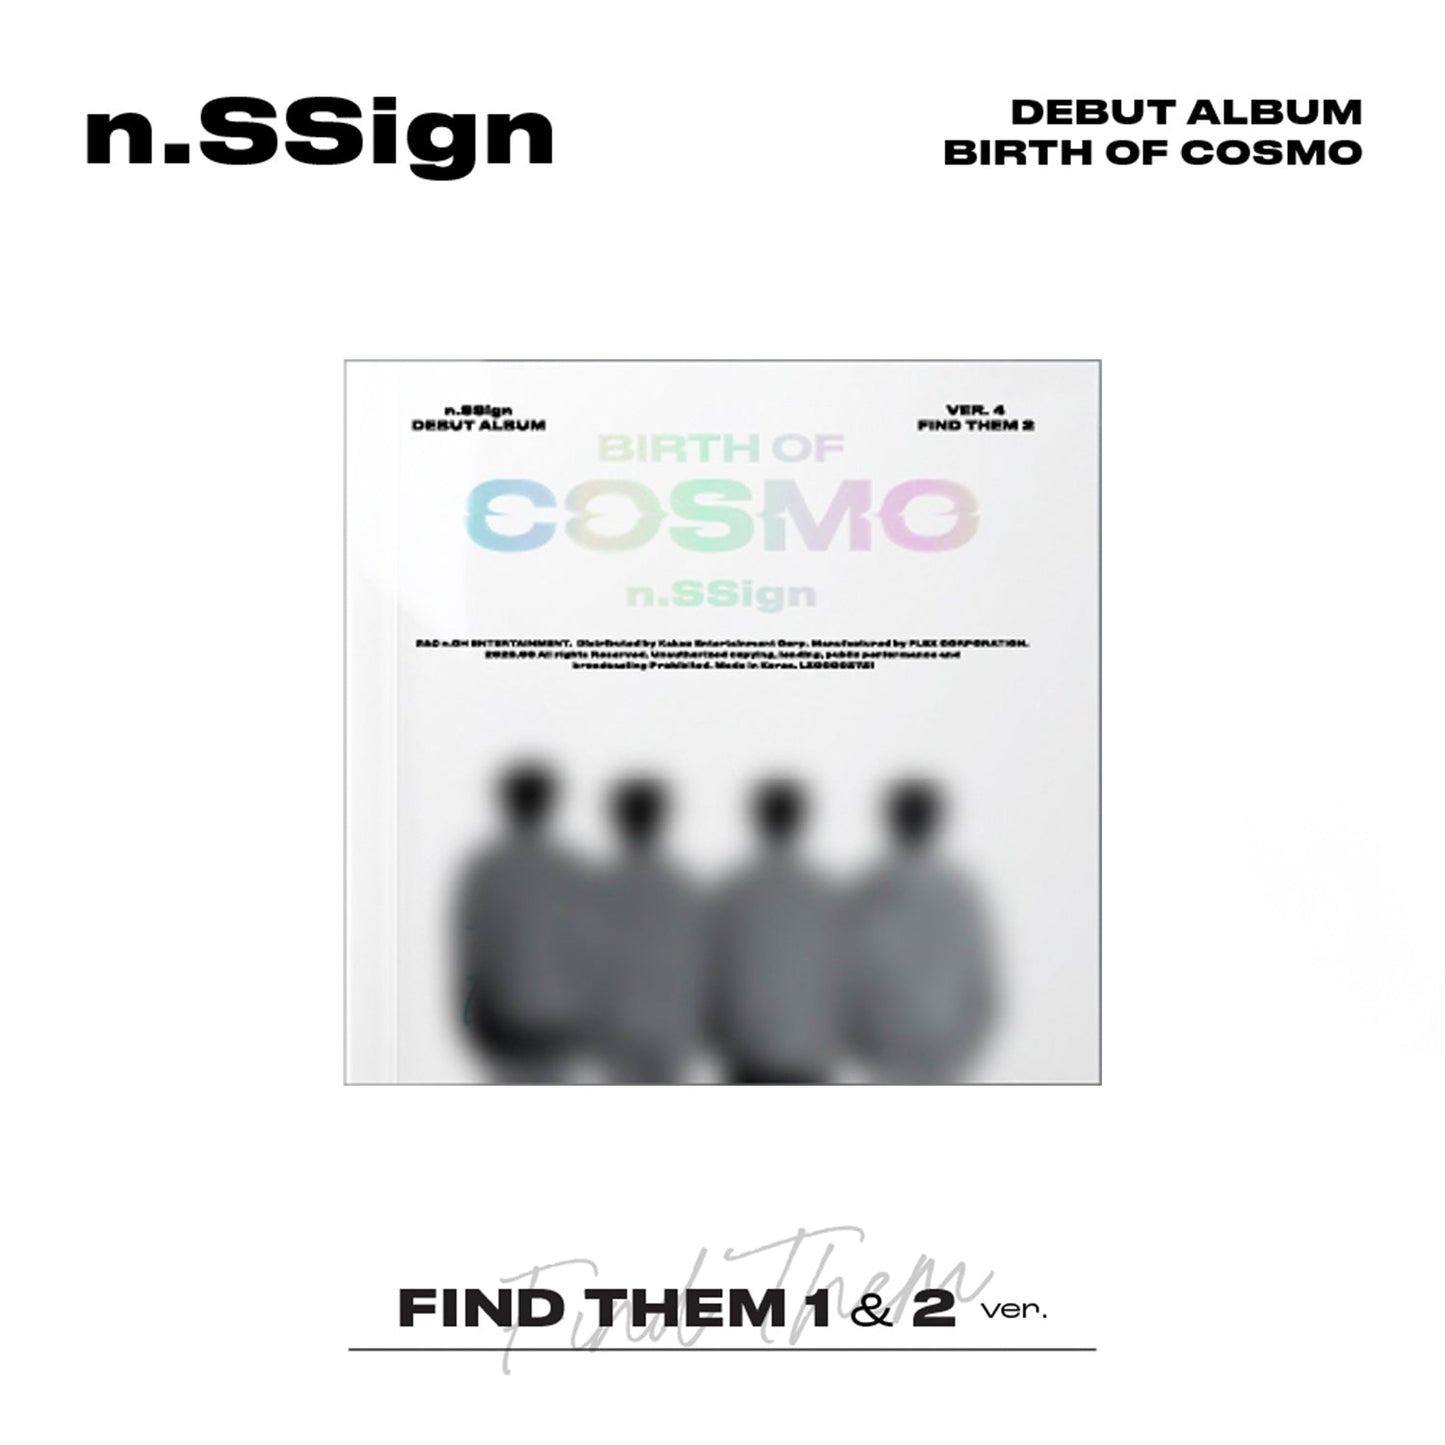 N.SSIGN DEBUT ALBUM 'BIRTH OF COSMO' (FIND THEM) FIND THEM 2 VERSION COVER